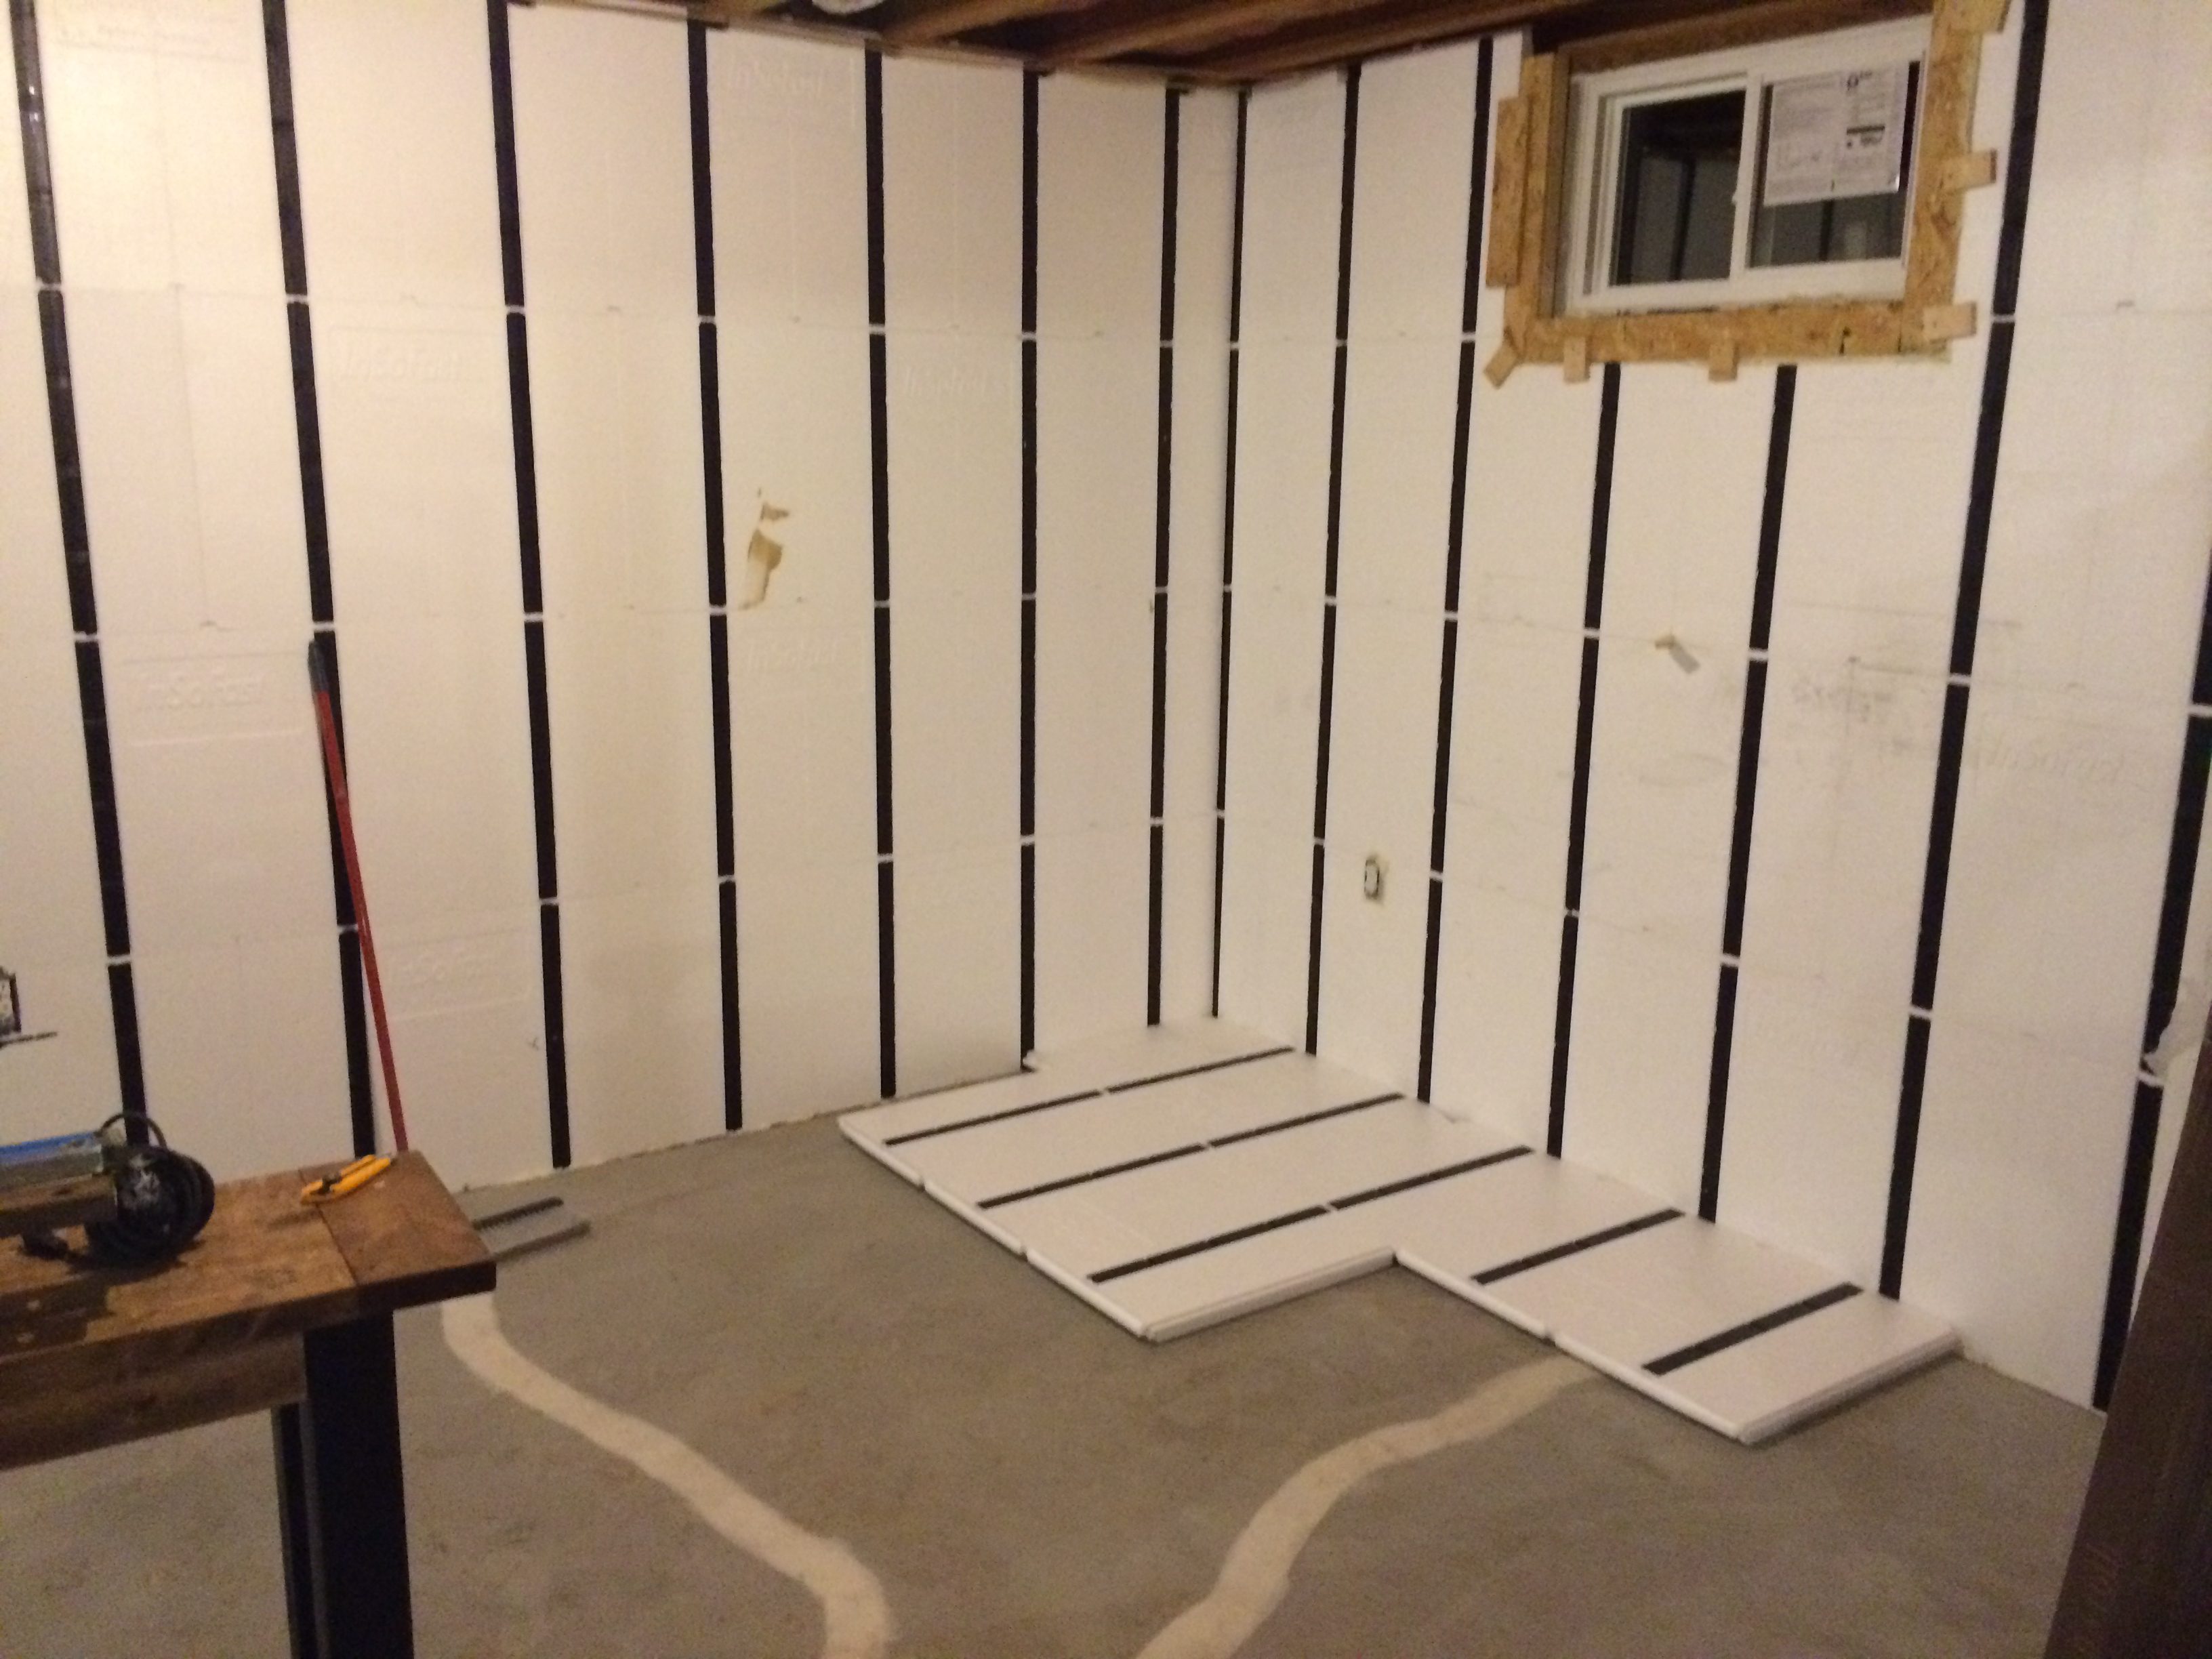 Inorganic Basement Wall Panels In Stamford Norwalk West Hartford By Expert Contractors Basement To Beautiful Insulated Wall Panels